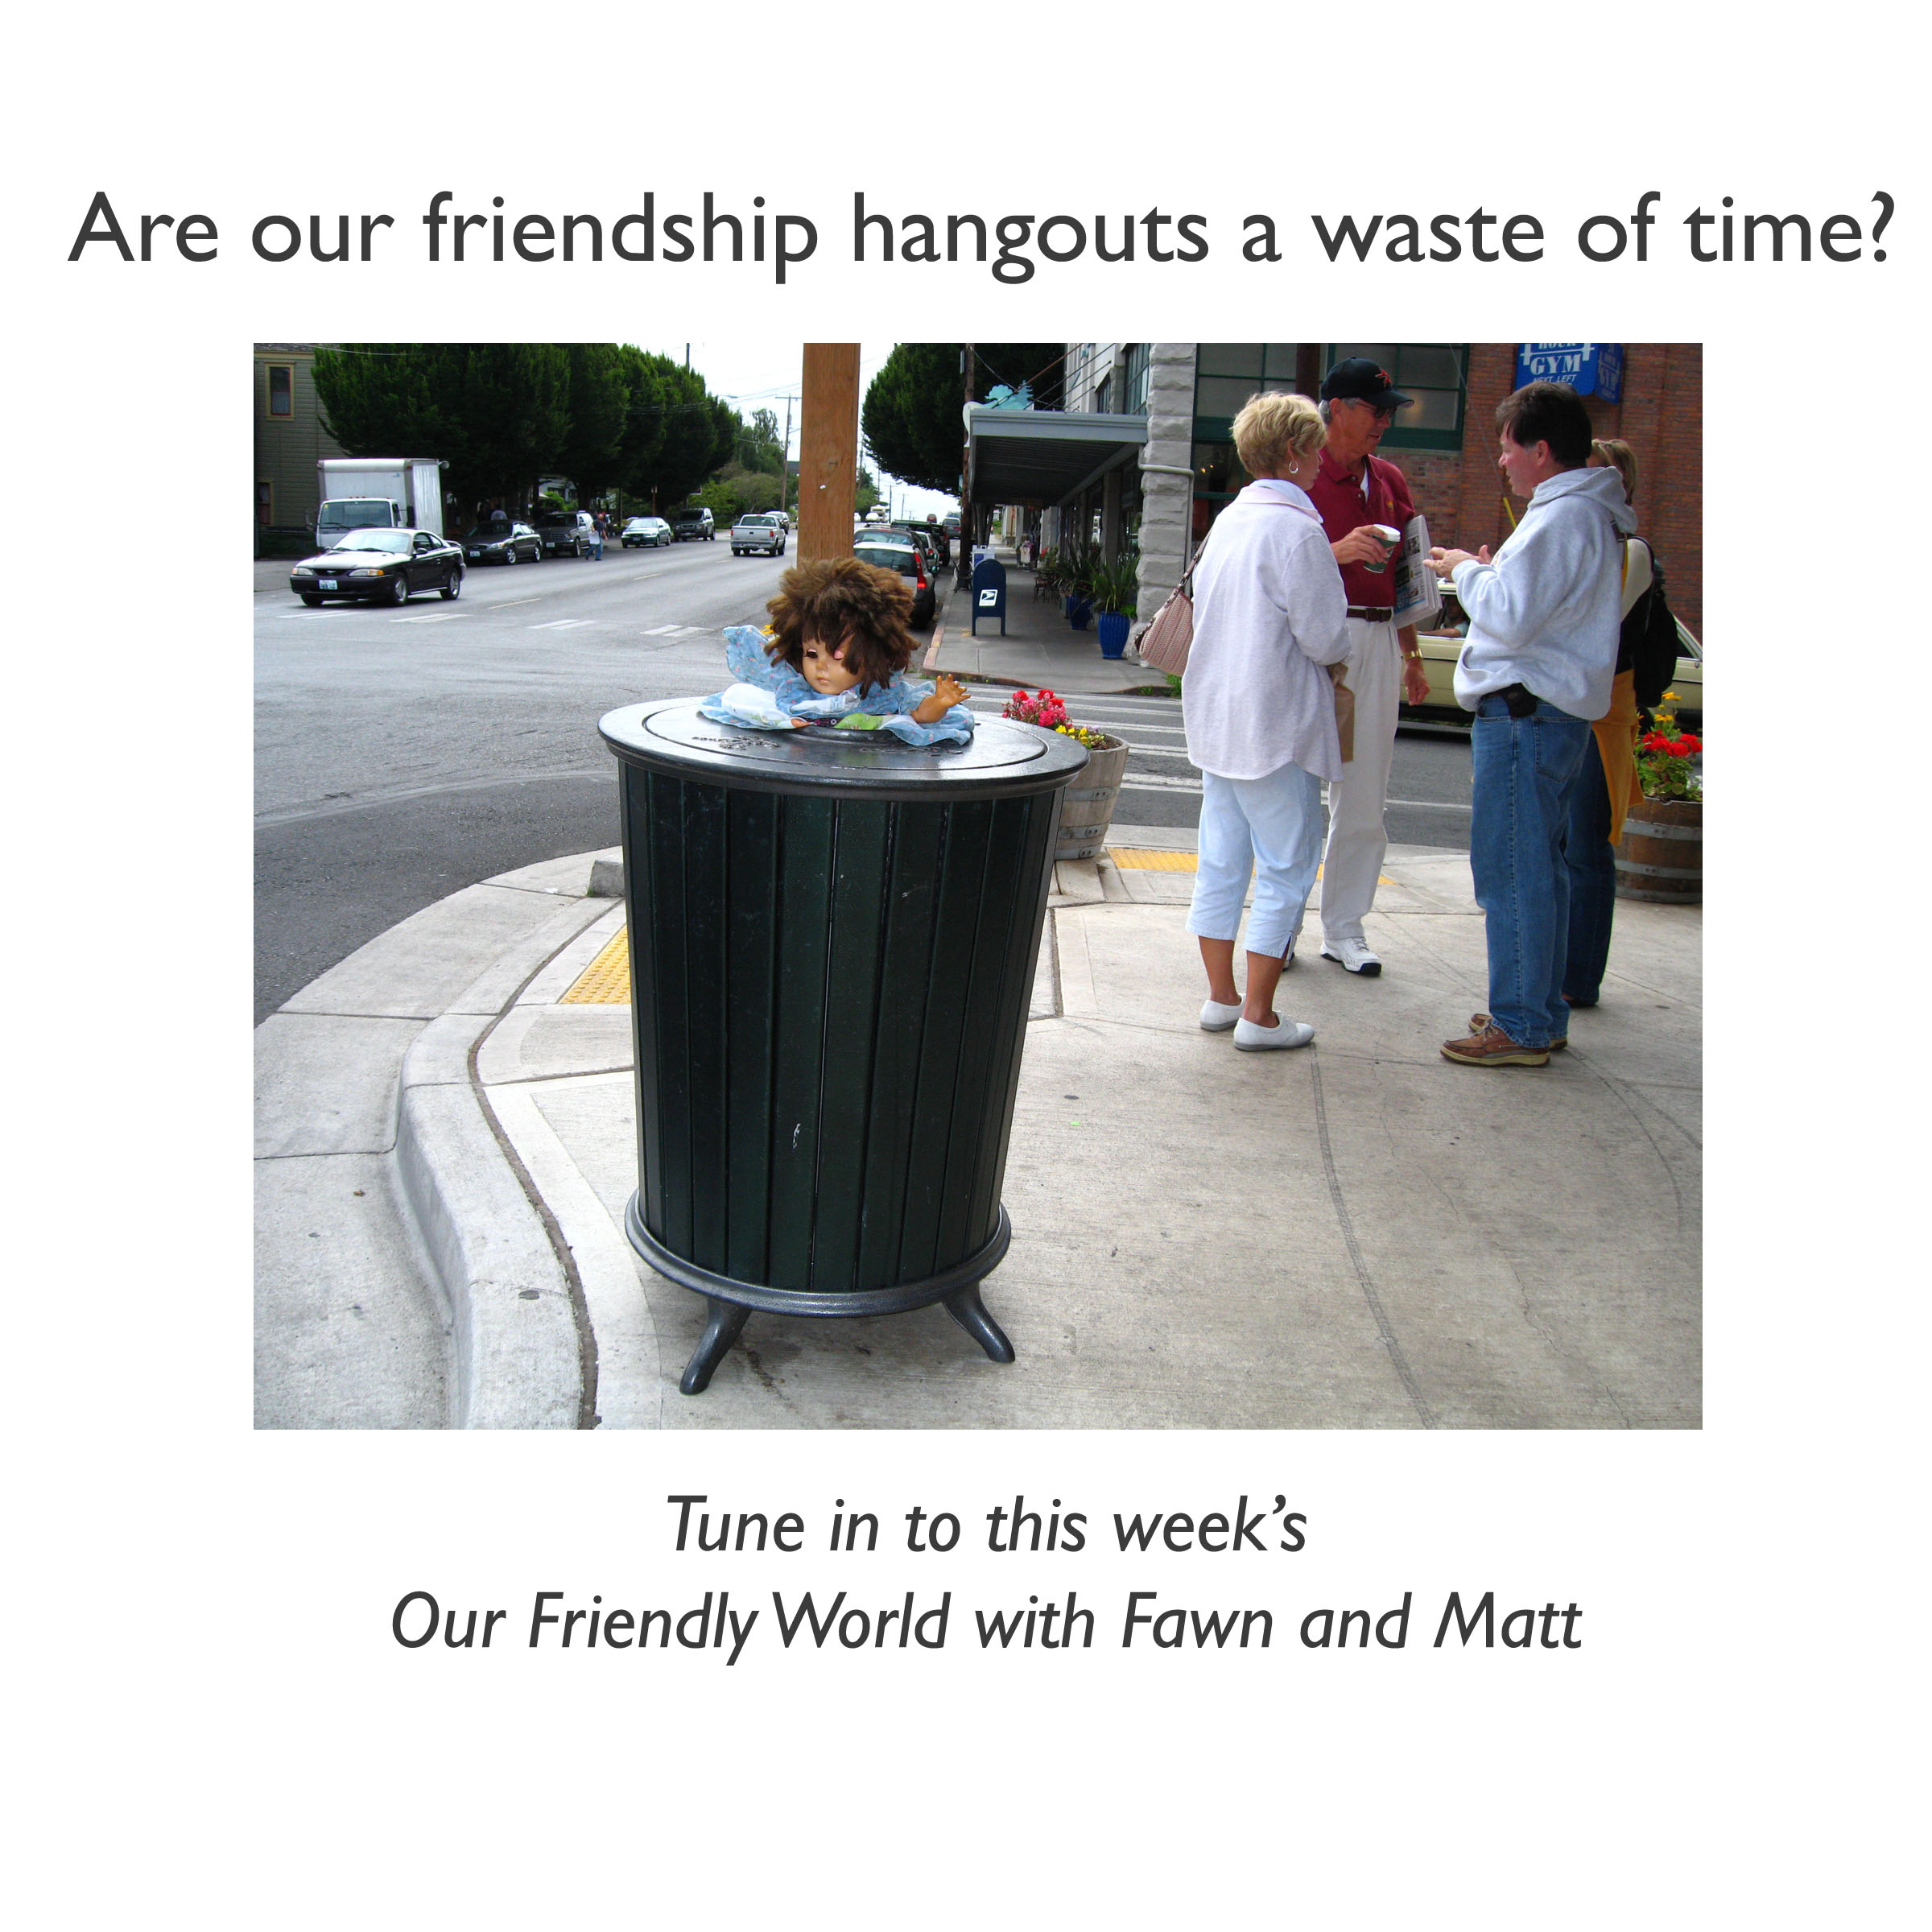 Wasted Time - How Do We Enjoy Our Time Together?